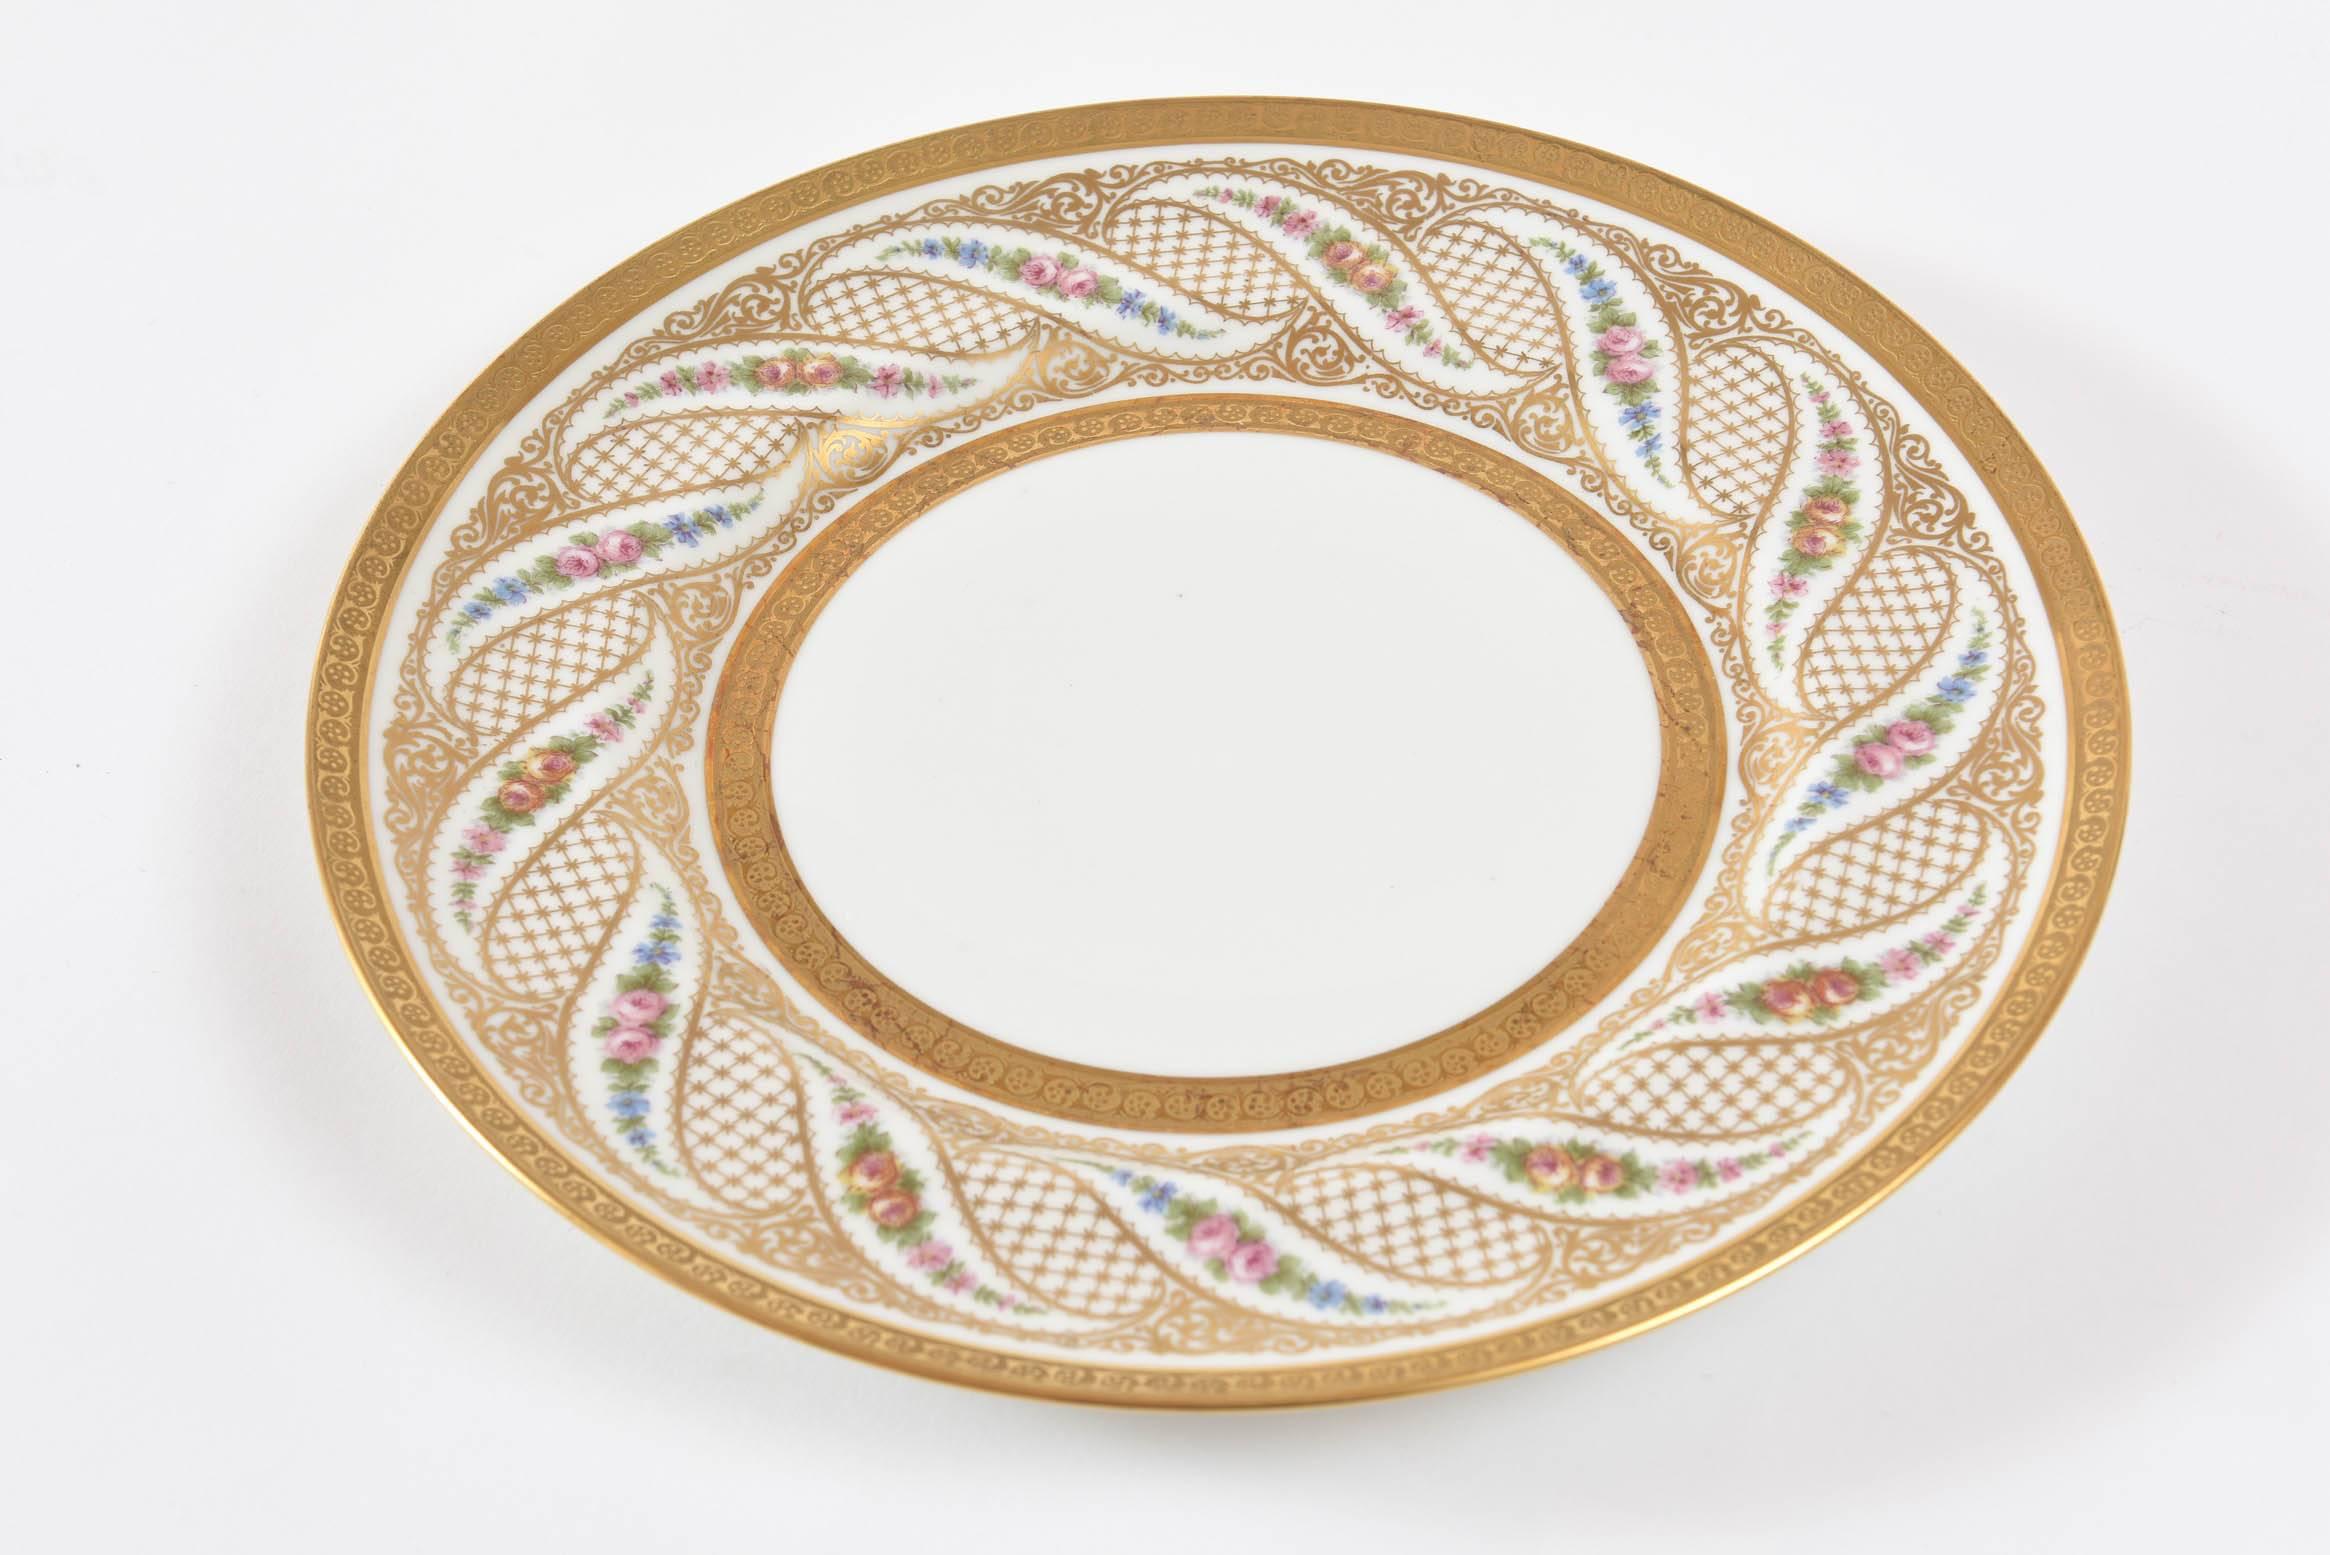 Hand-Crafted Antique Limoges Dinner Plates, Set of 11 with Interesting Swirl Flower Design